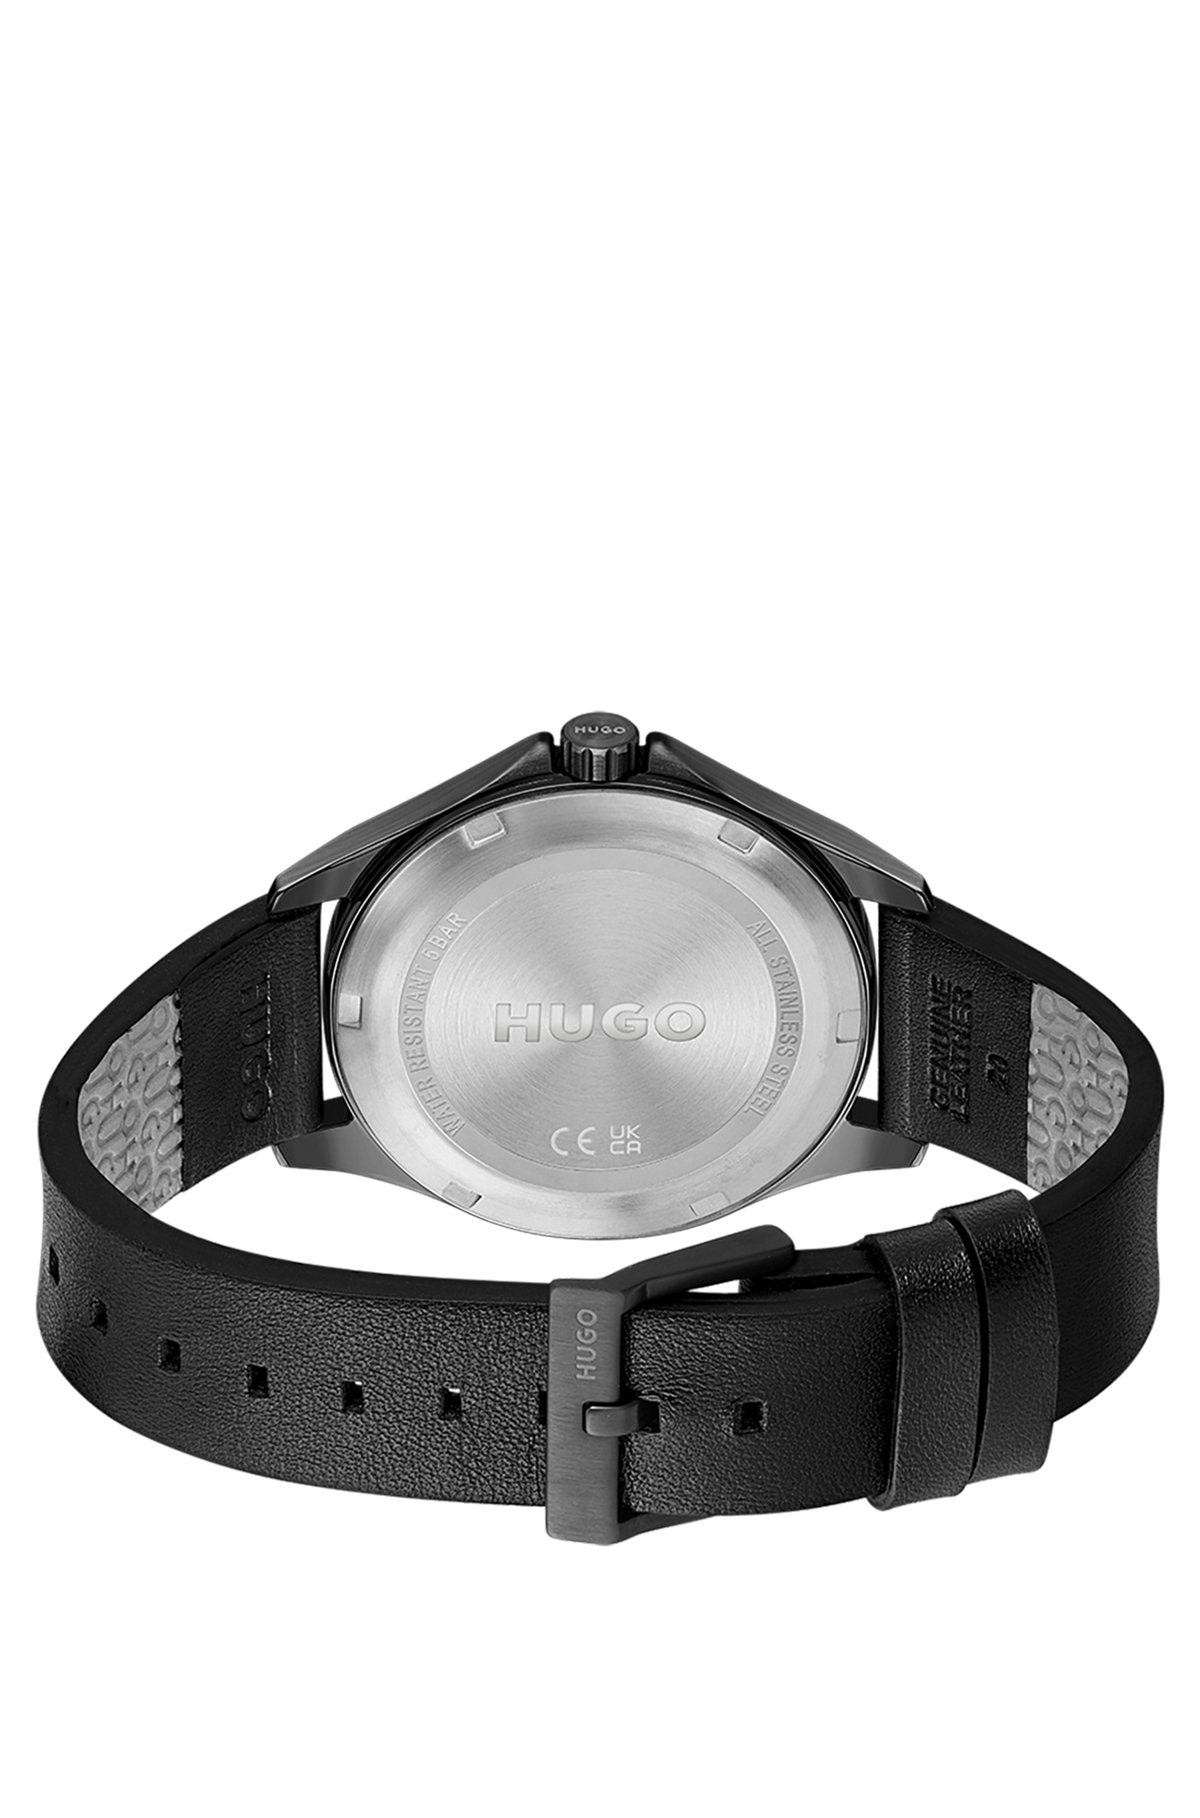 Black-dial watch with leather strap and logo details, Black